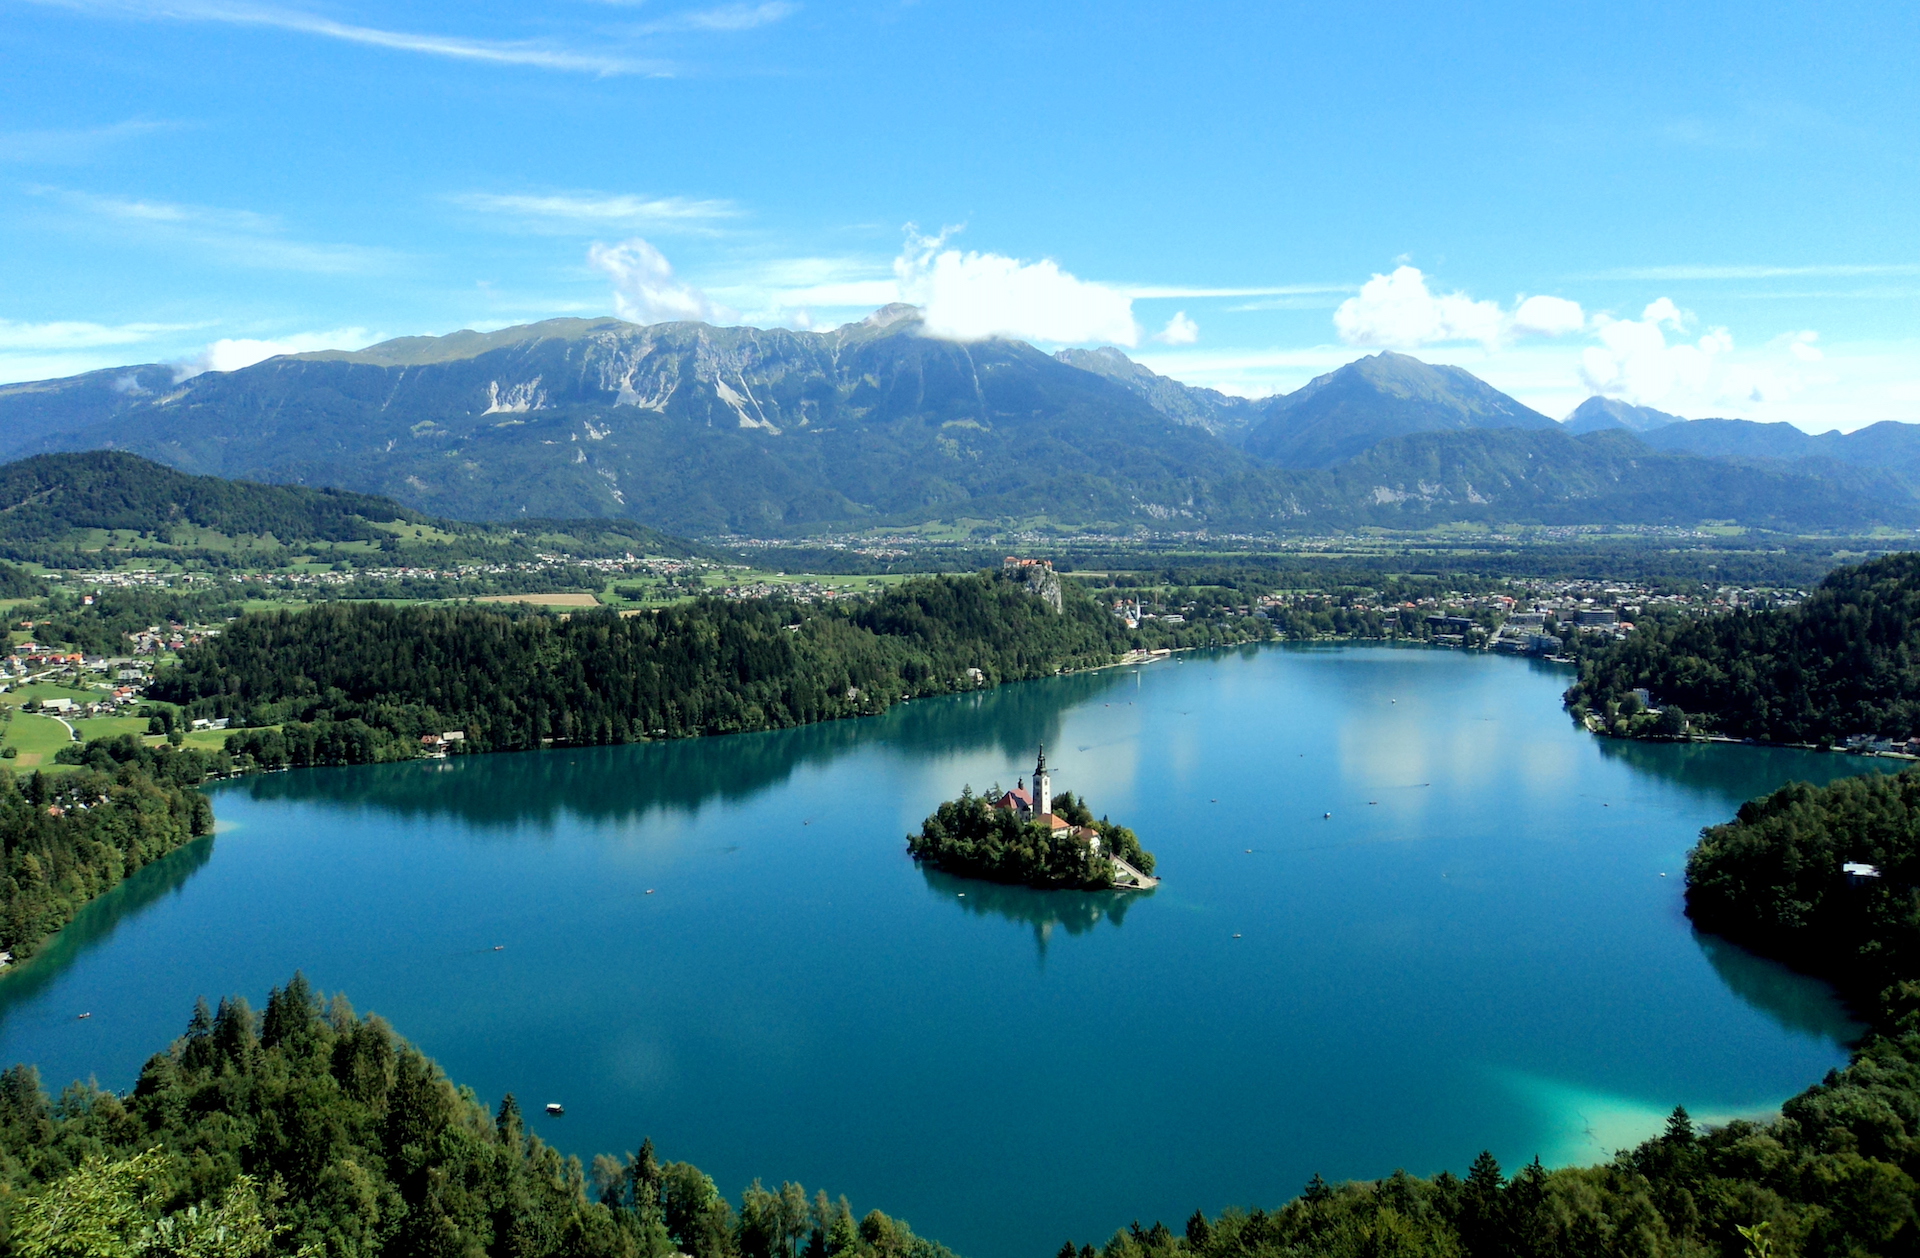 An aerial photo of a stunning, blue lake, with a church-island in the centre and mountains in the background.